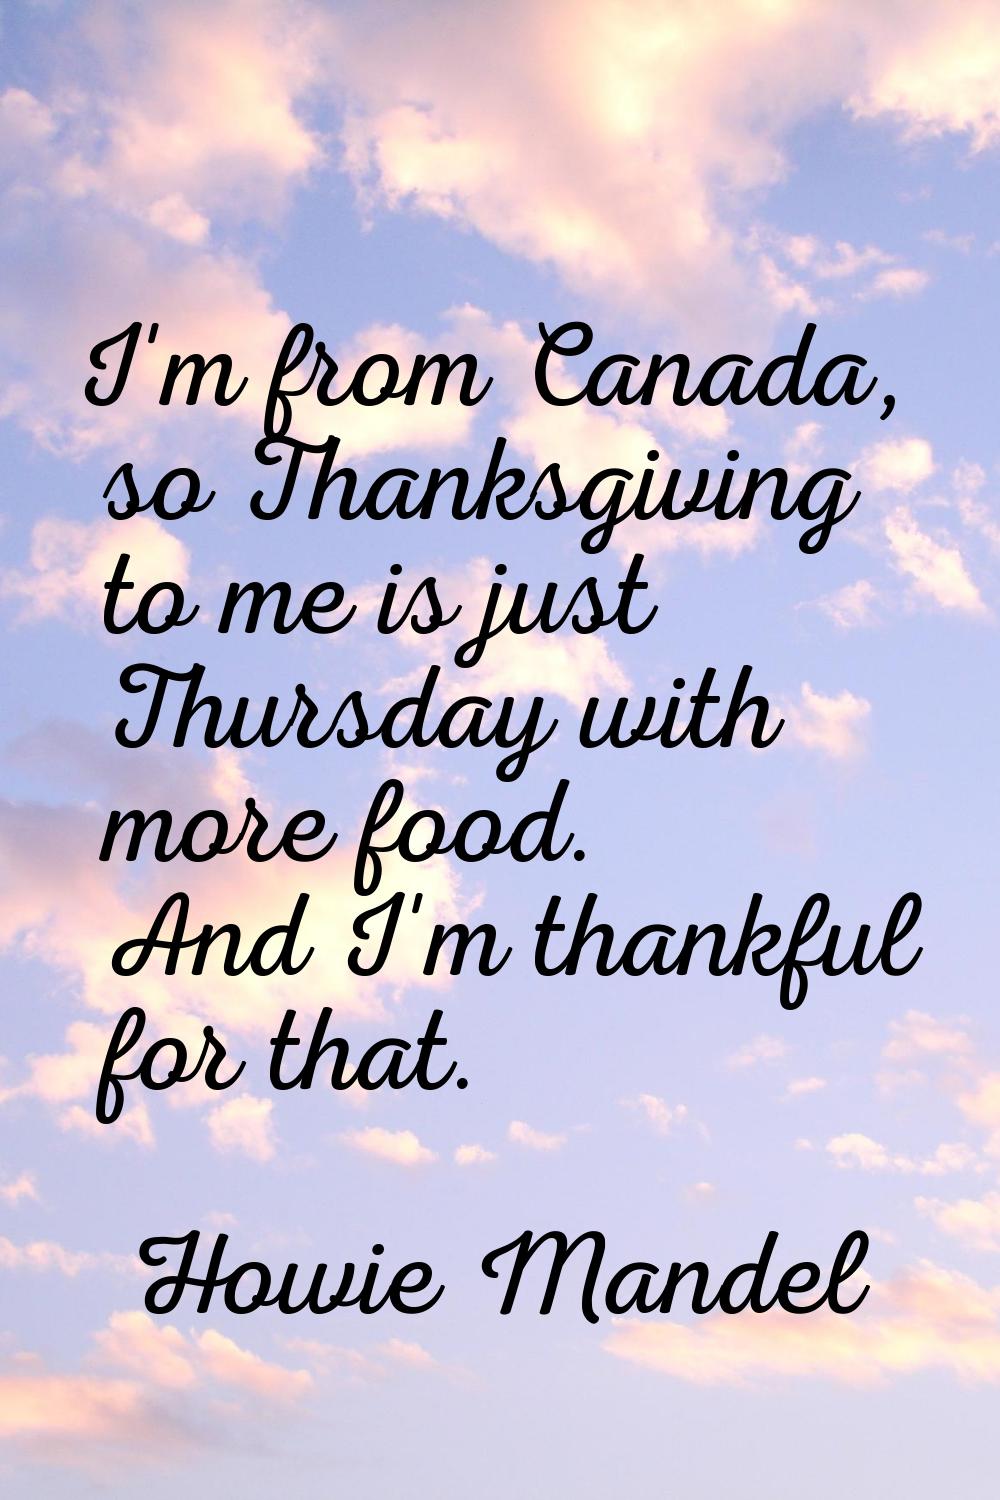 I'm from Canada, so Thanksgiving to me is just Thursday with more food. And I'm thankful for that.